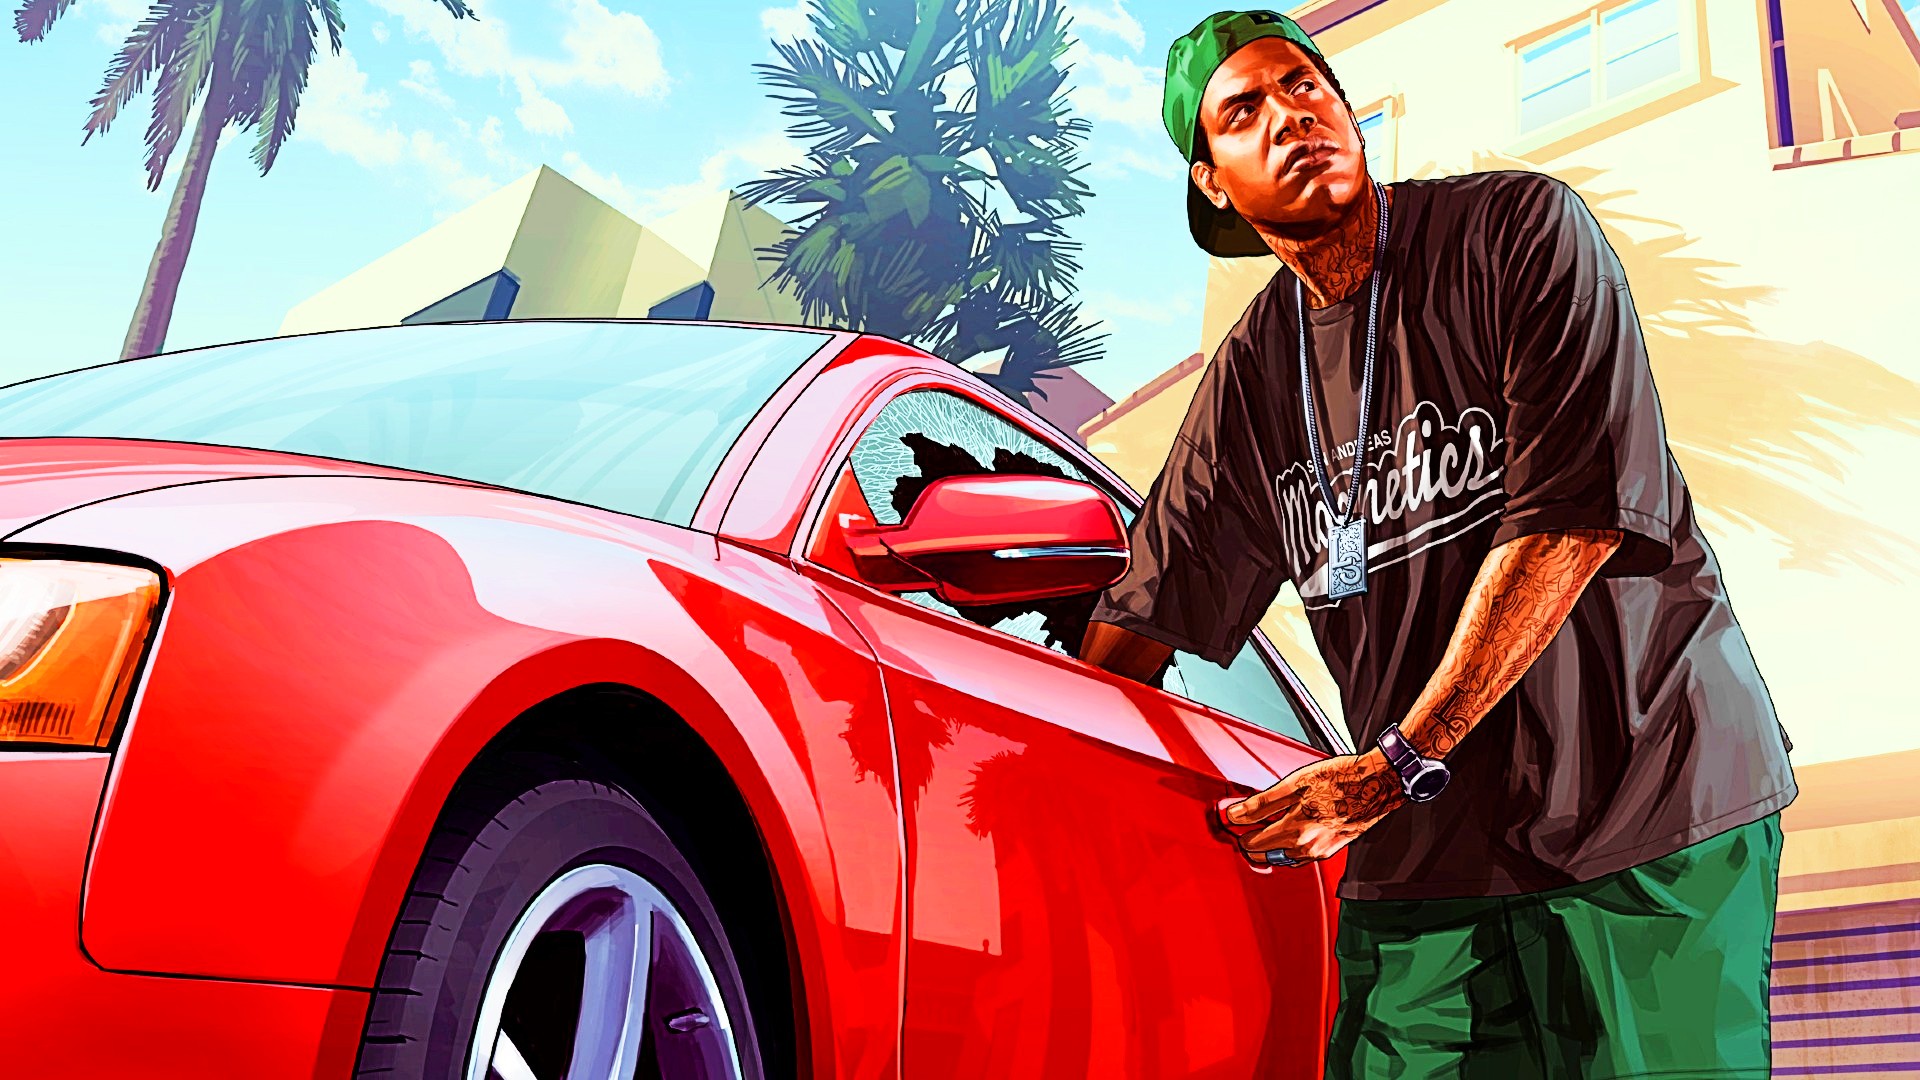 GTA V's NPCs might actually be players trying to steal your car